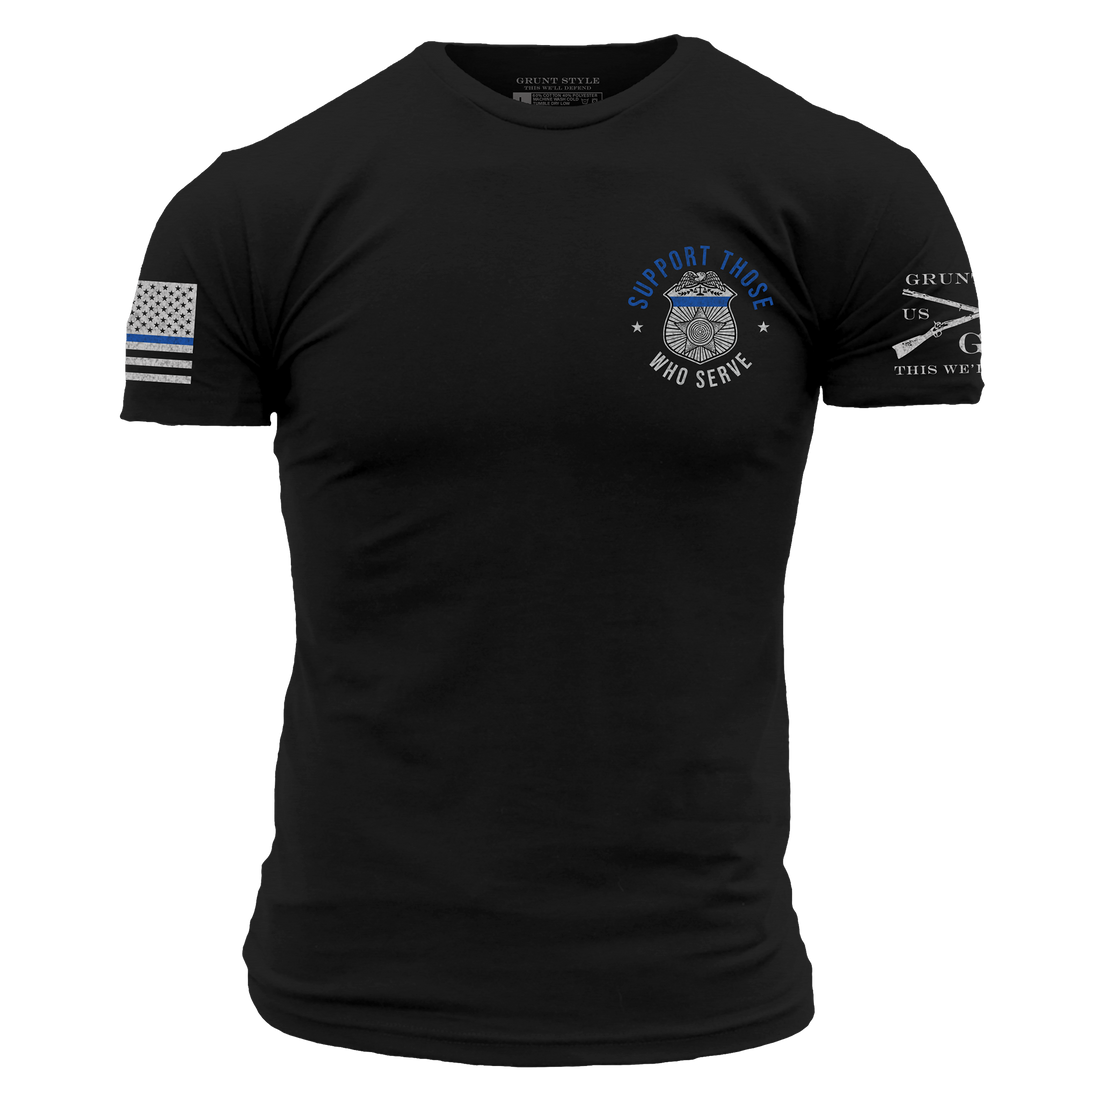 Police Shirts for Men 